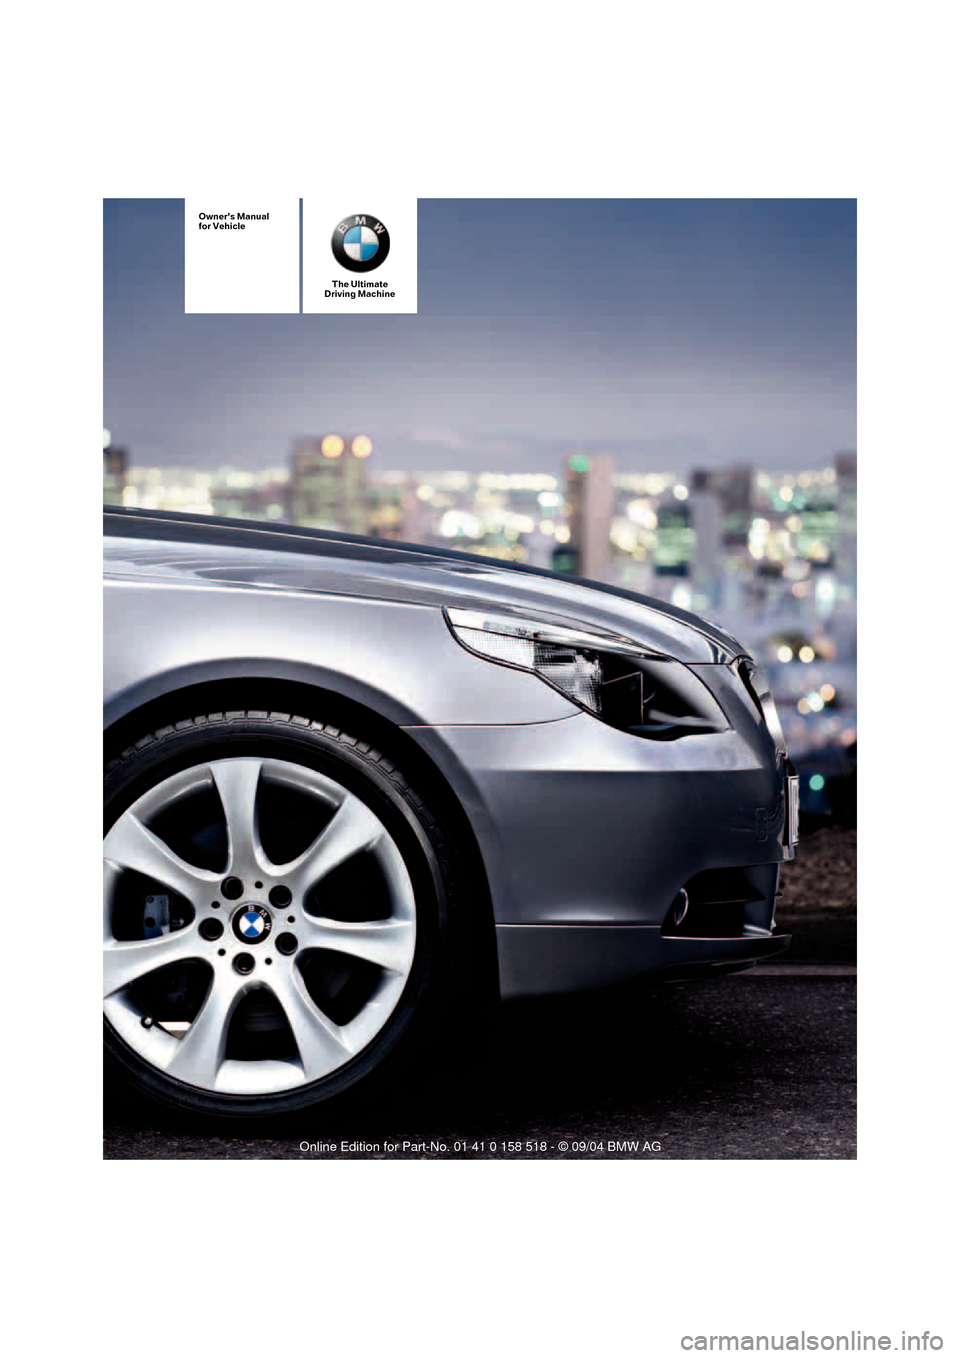 BMW 525I SEDAN 2005 E60 Owners Manual The Ultimate
Driving Machine
Owners Manual
for Vehicle 